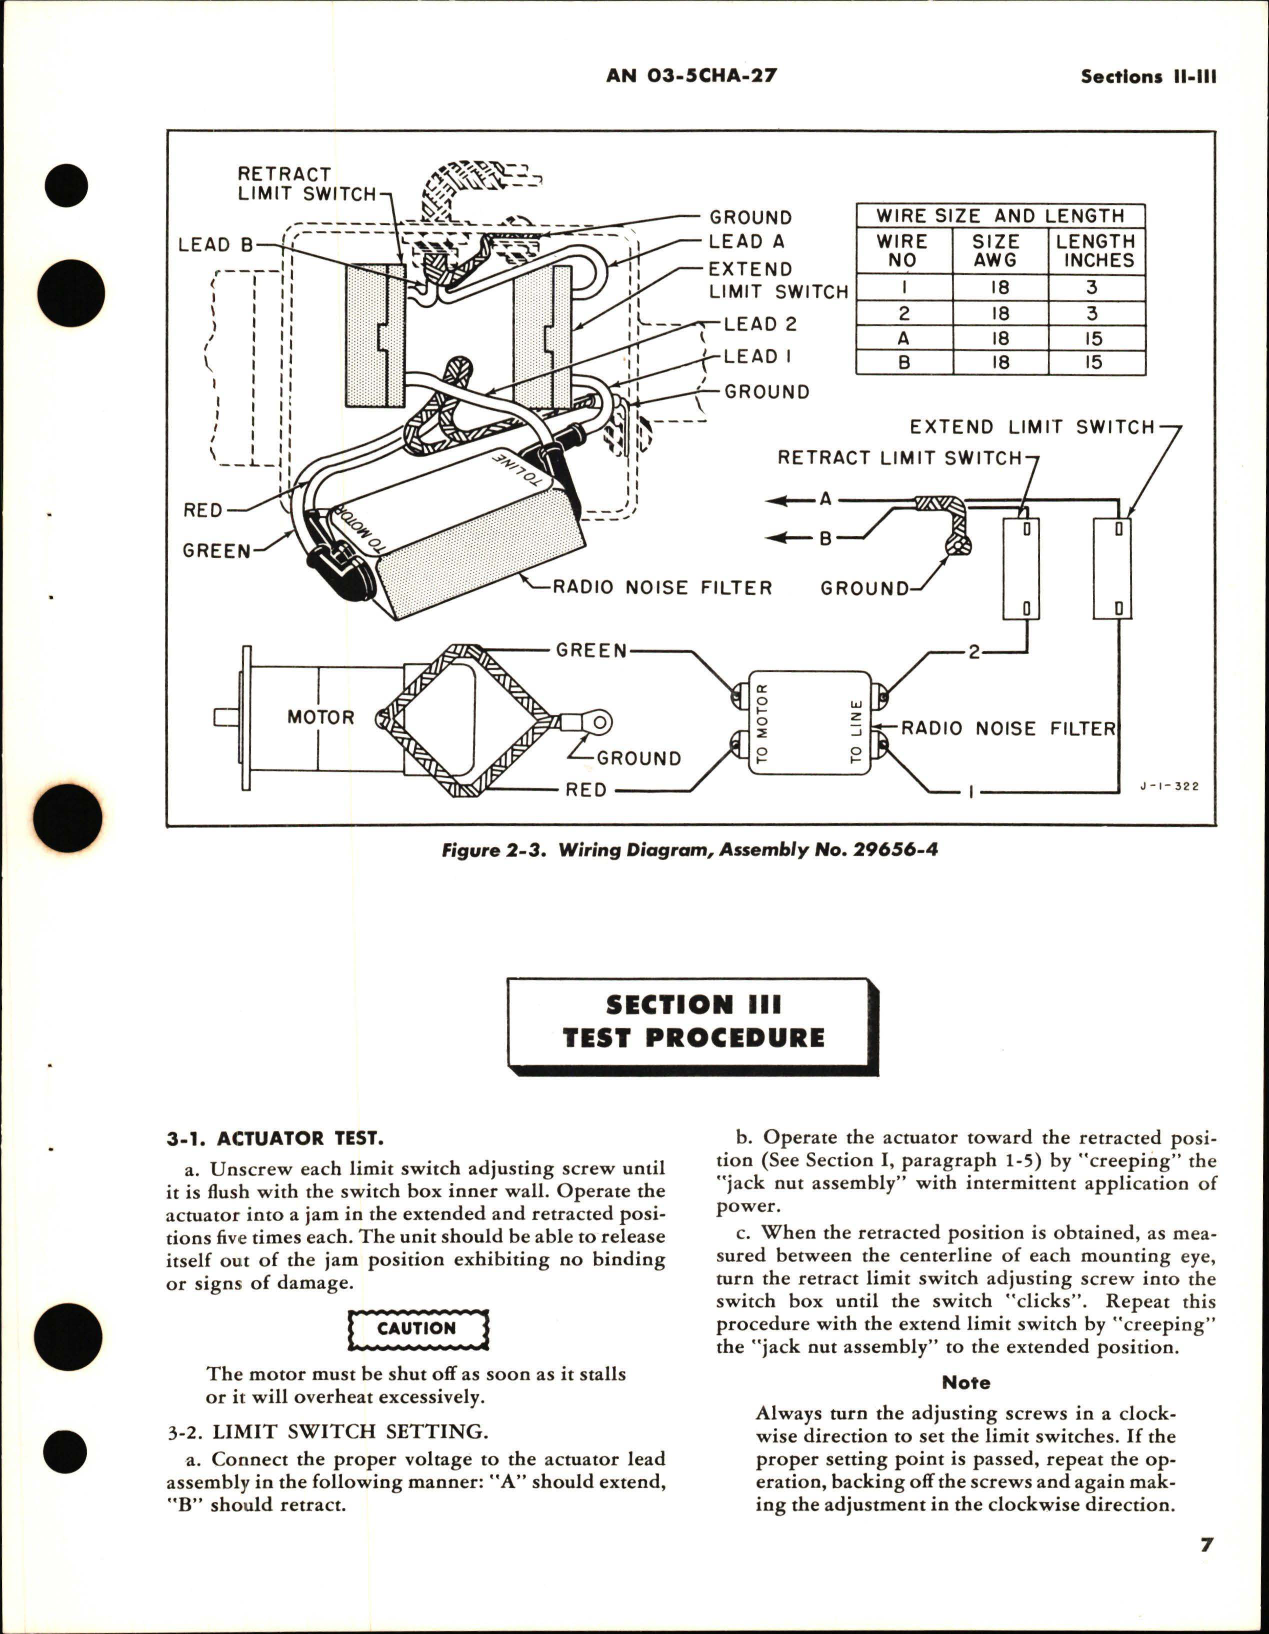 Sample page 9 from AirCorps Library document: Overhaul Instructions for Electromechanical Linear Actuators 